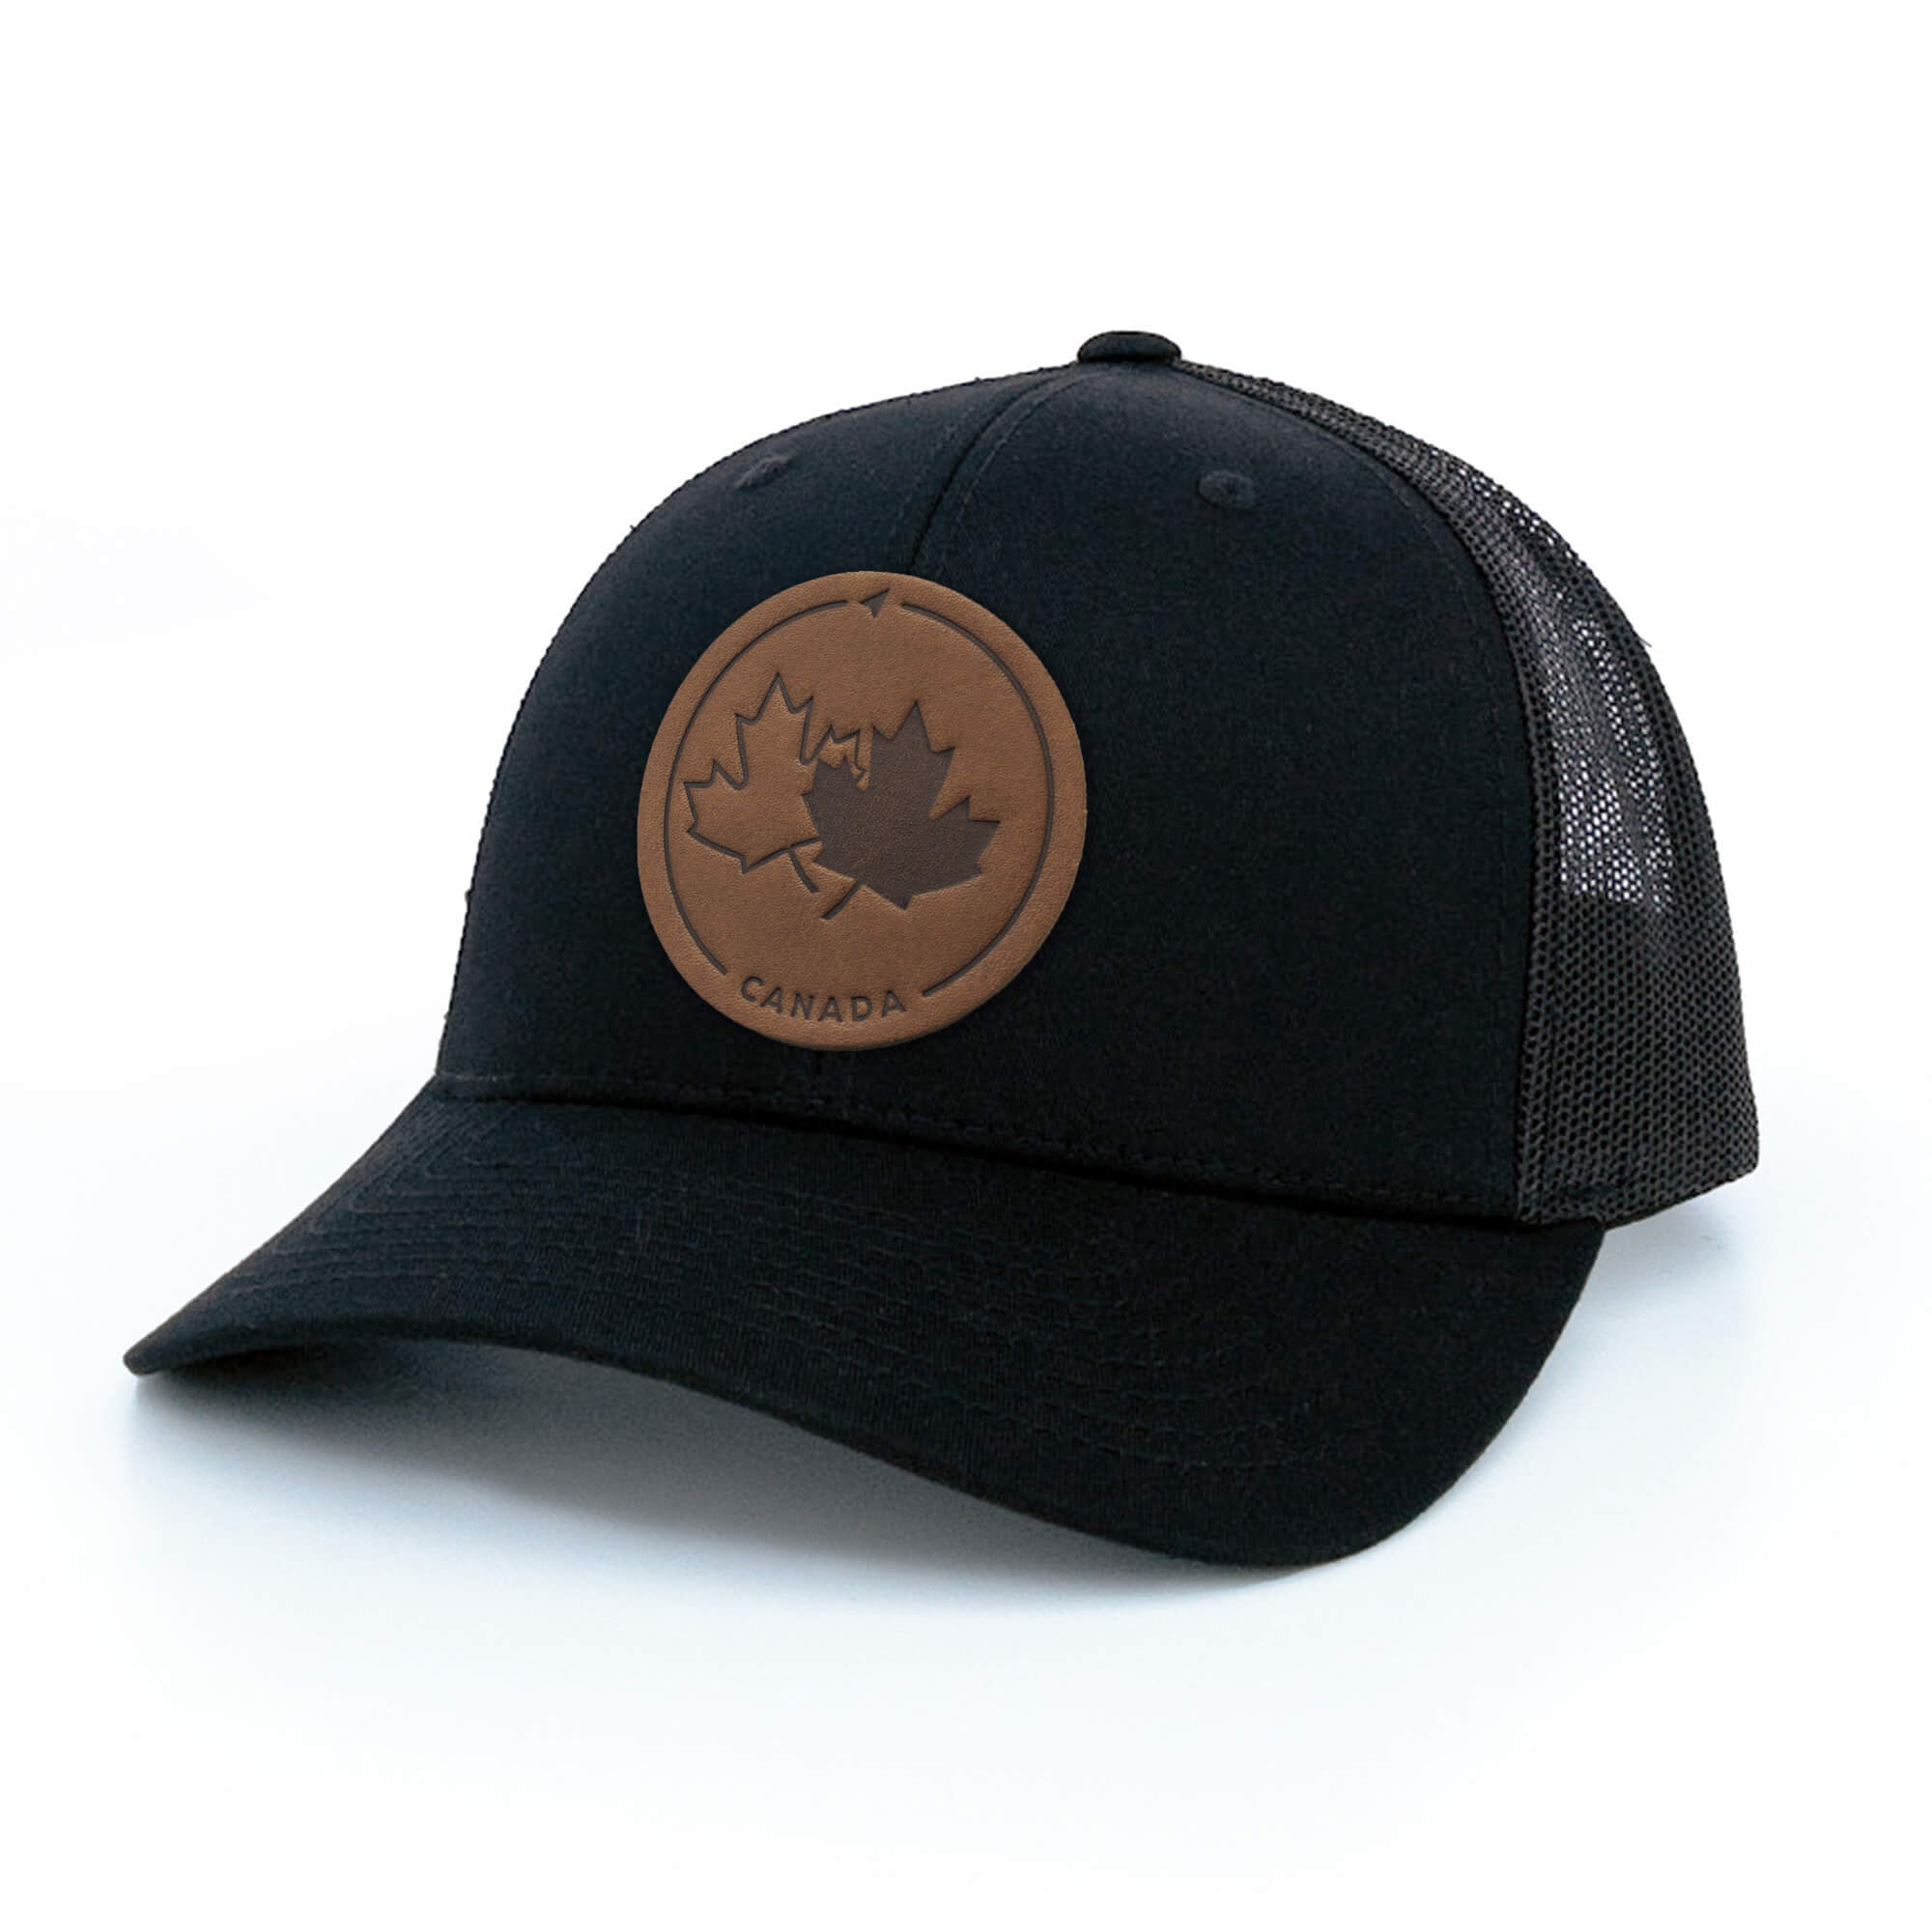 Black trucker hat with full-grain leather patch of Canada Strong and Free | BLACK-002-010, CHARC-002-010, NAVY-002-010, HGREY-002-010, MOSS-002-010, BROWN-002-010, RED-002-010